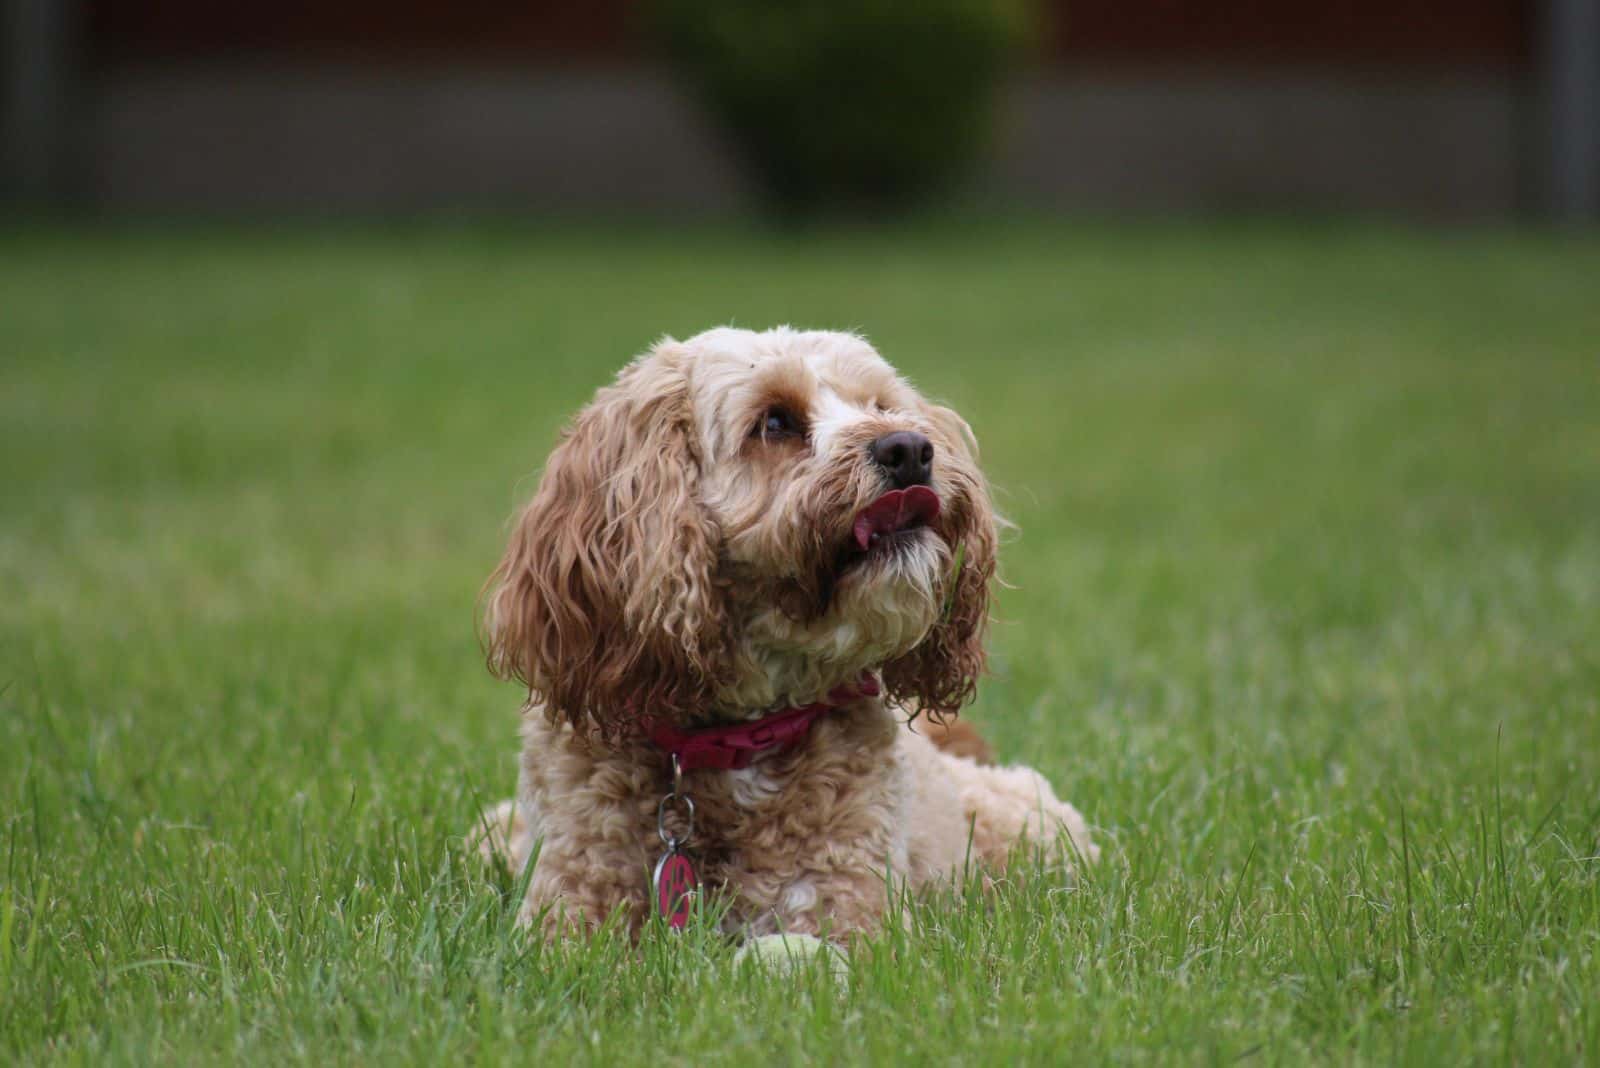 A Cavapoo is lying in a field and looking at the sky